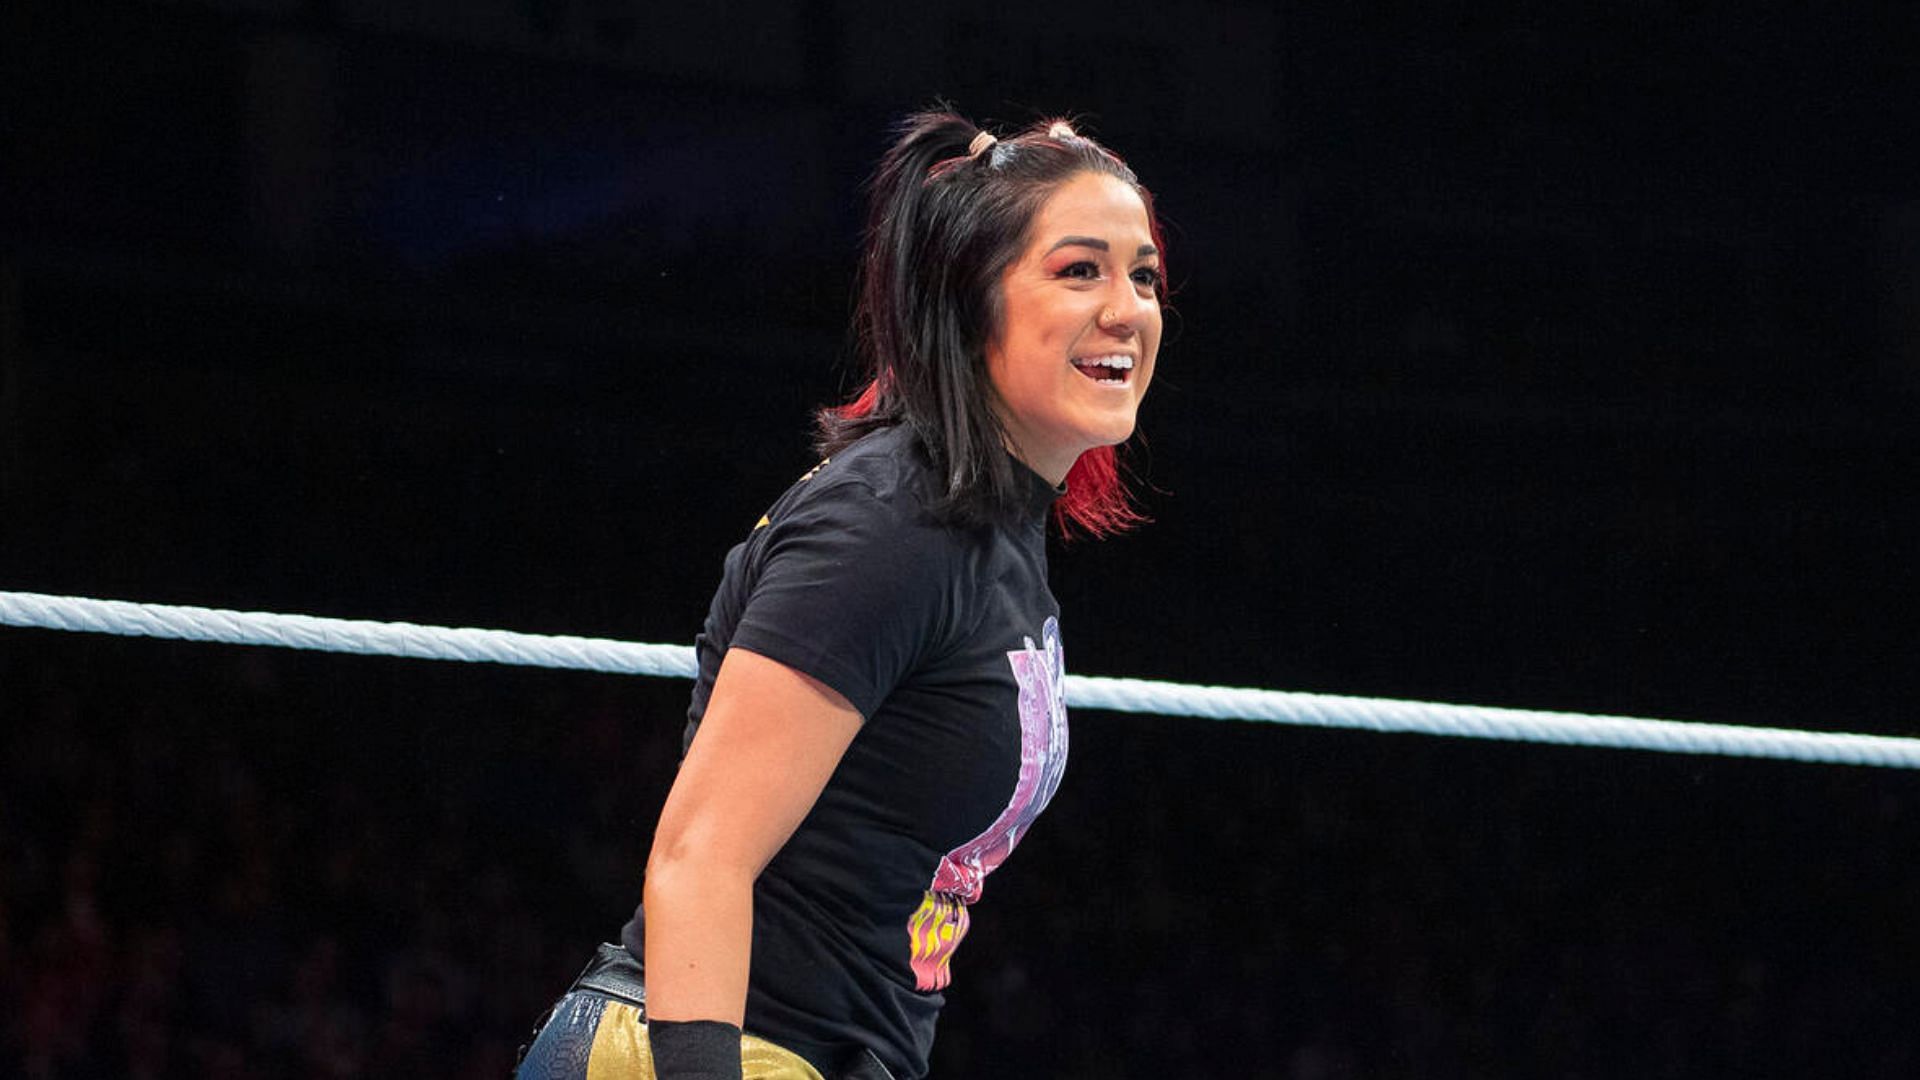 Bayley punched her ticket to WrestleMania XL!